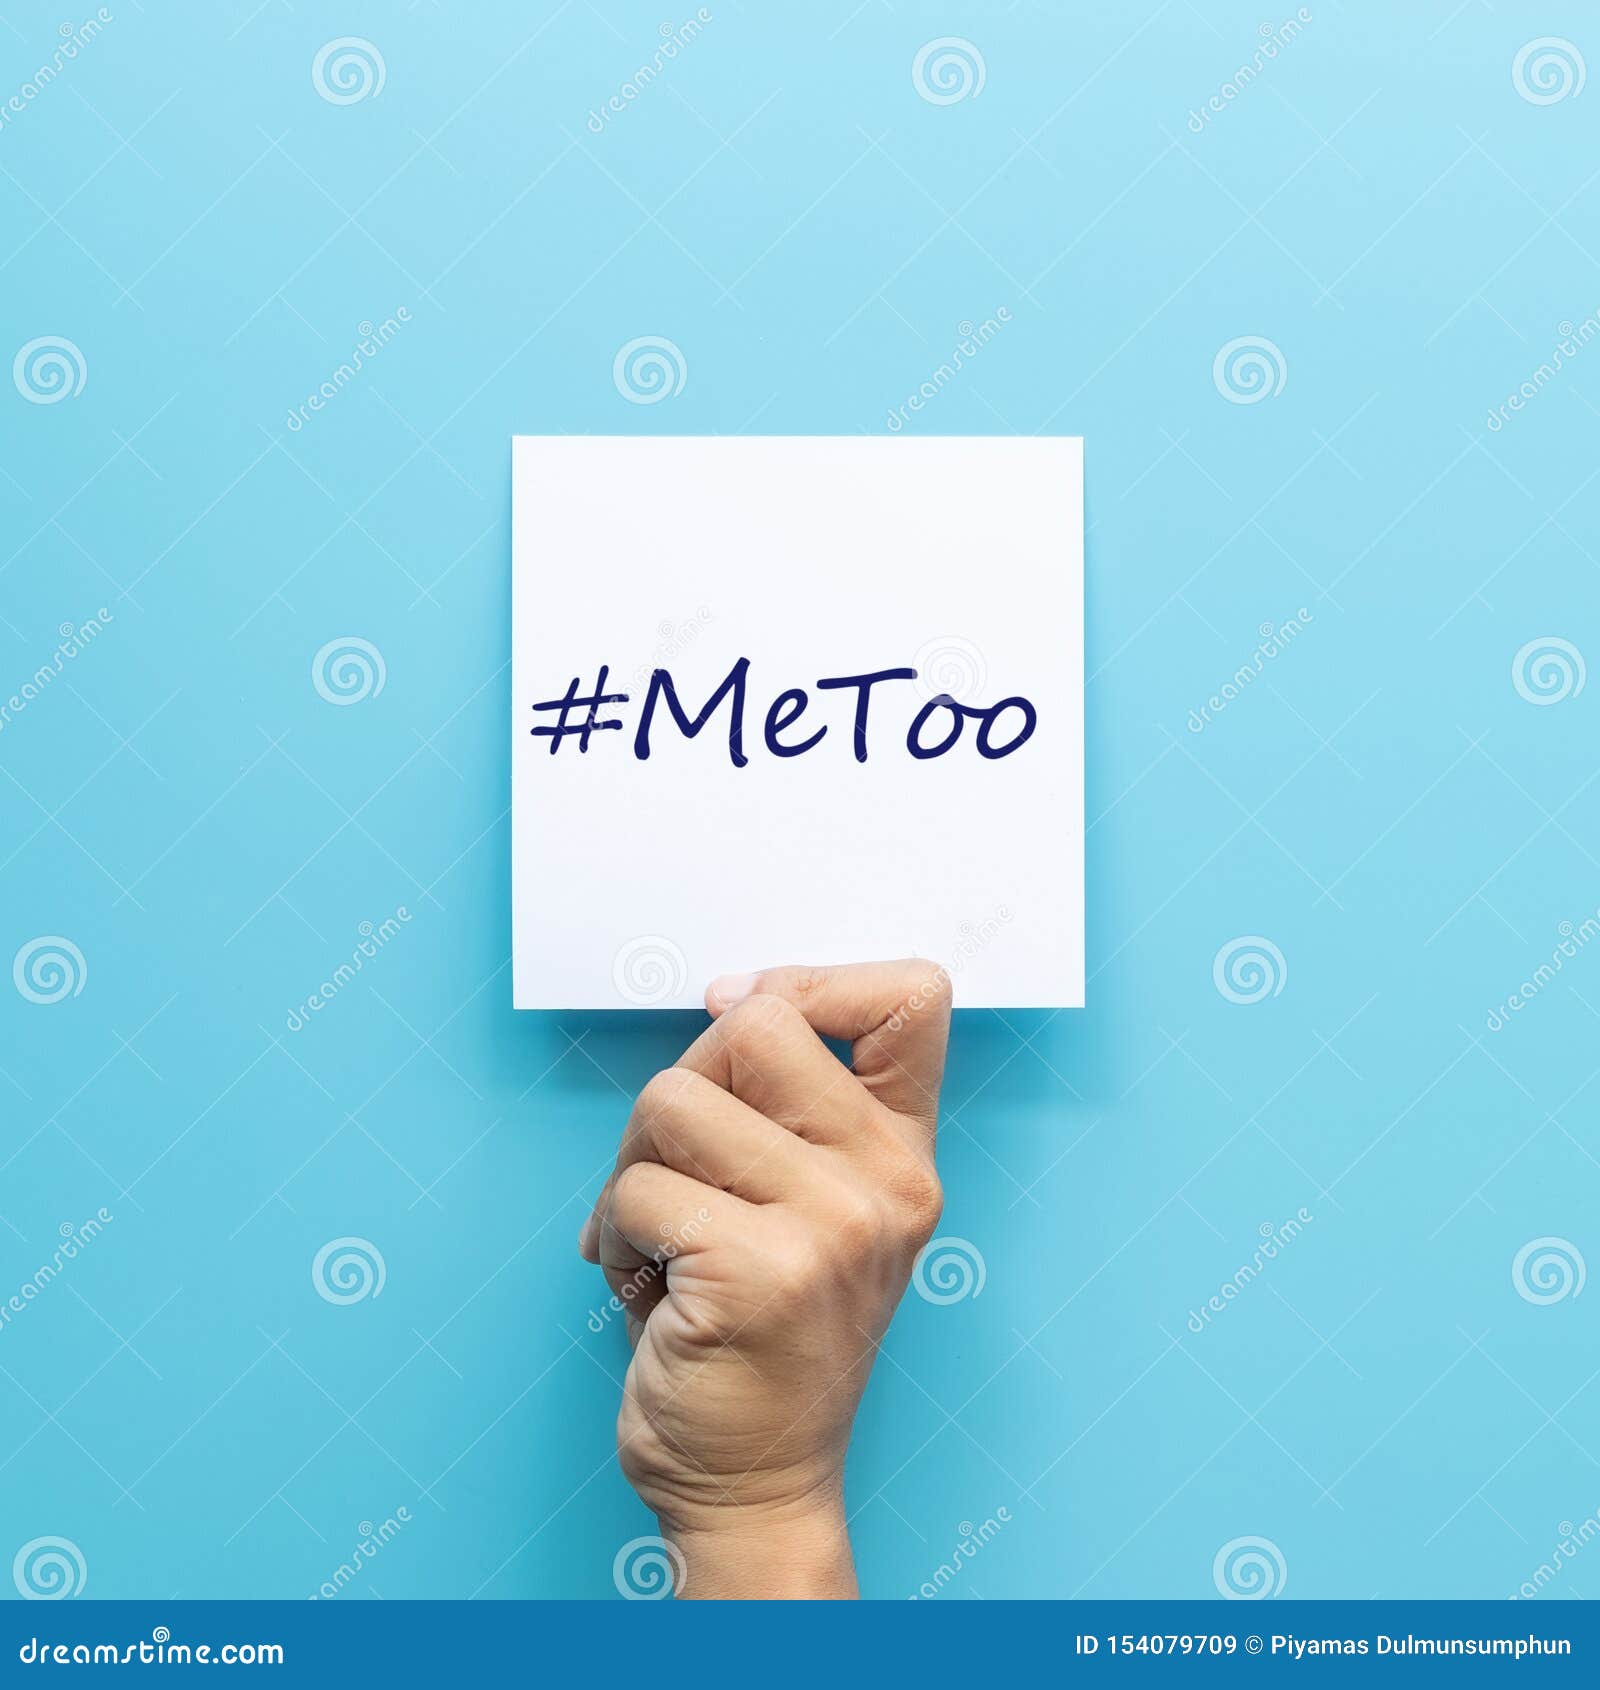 hashtag  metoo on white paper in hand  on blue background.  metoo is a campaign for movement against sexual harassment